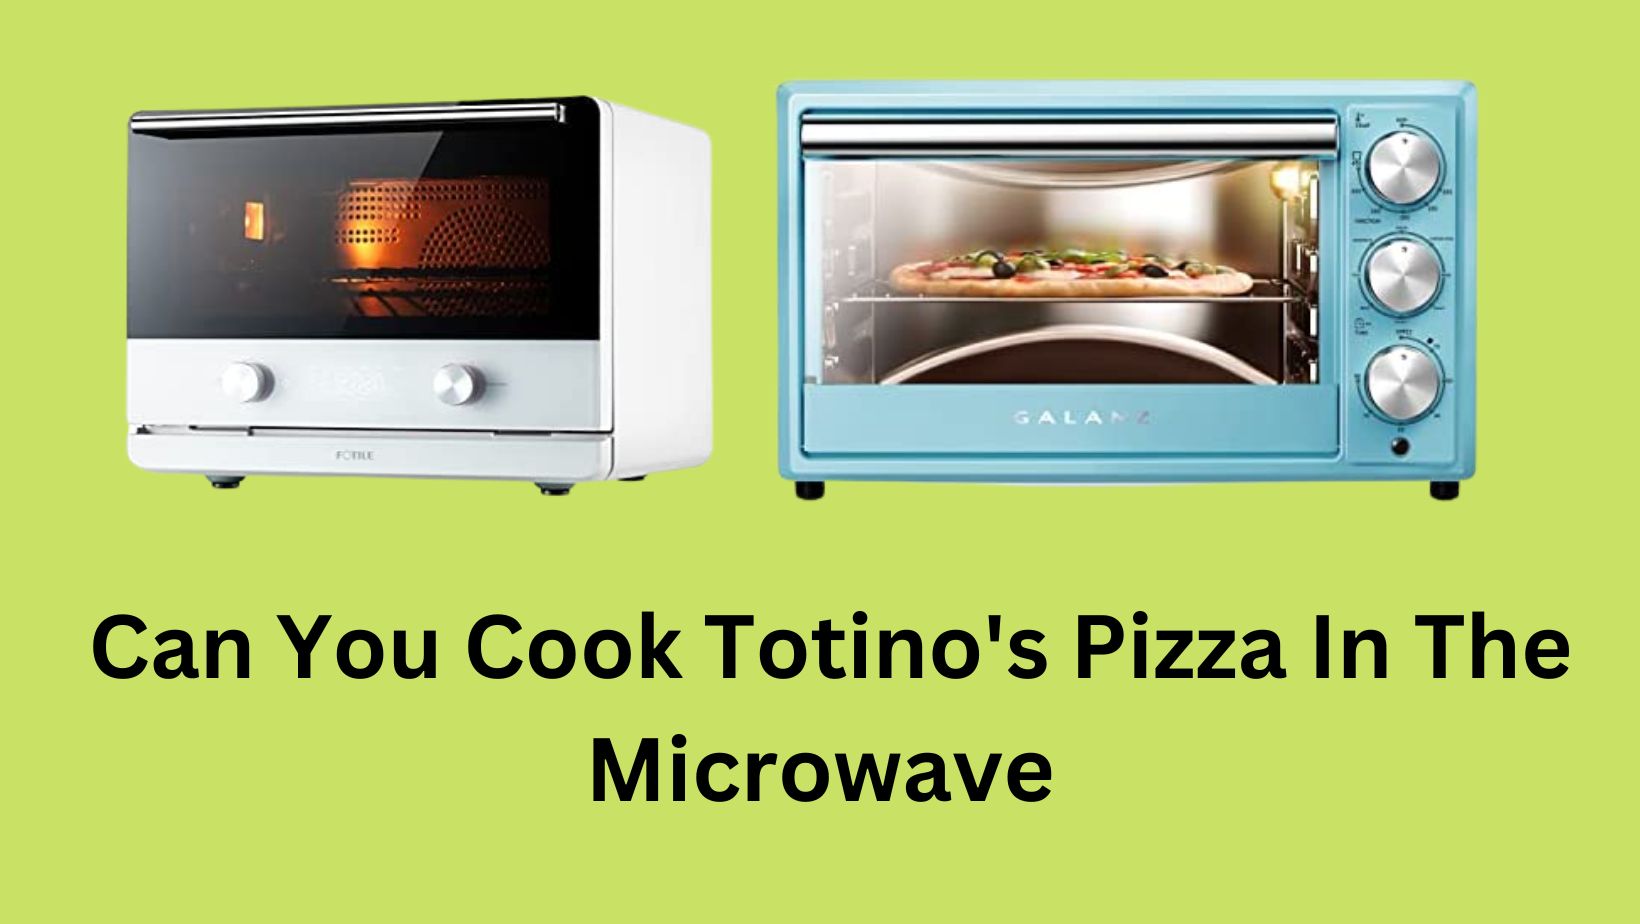 can you cook totino's pizza in the microwave